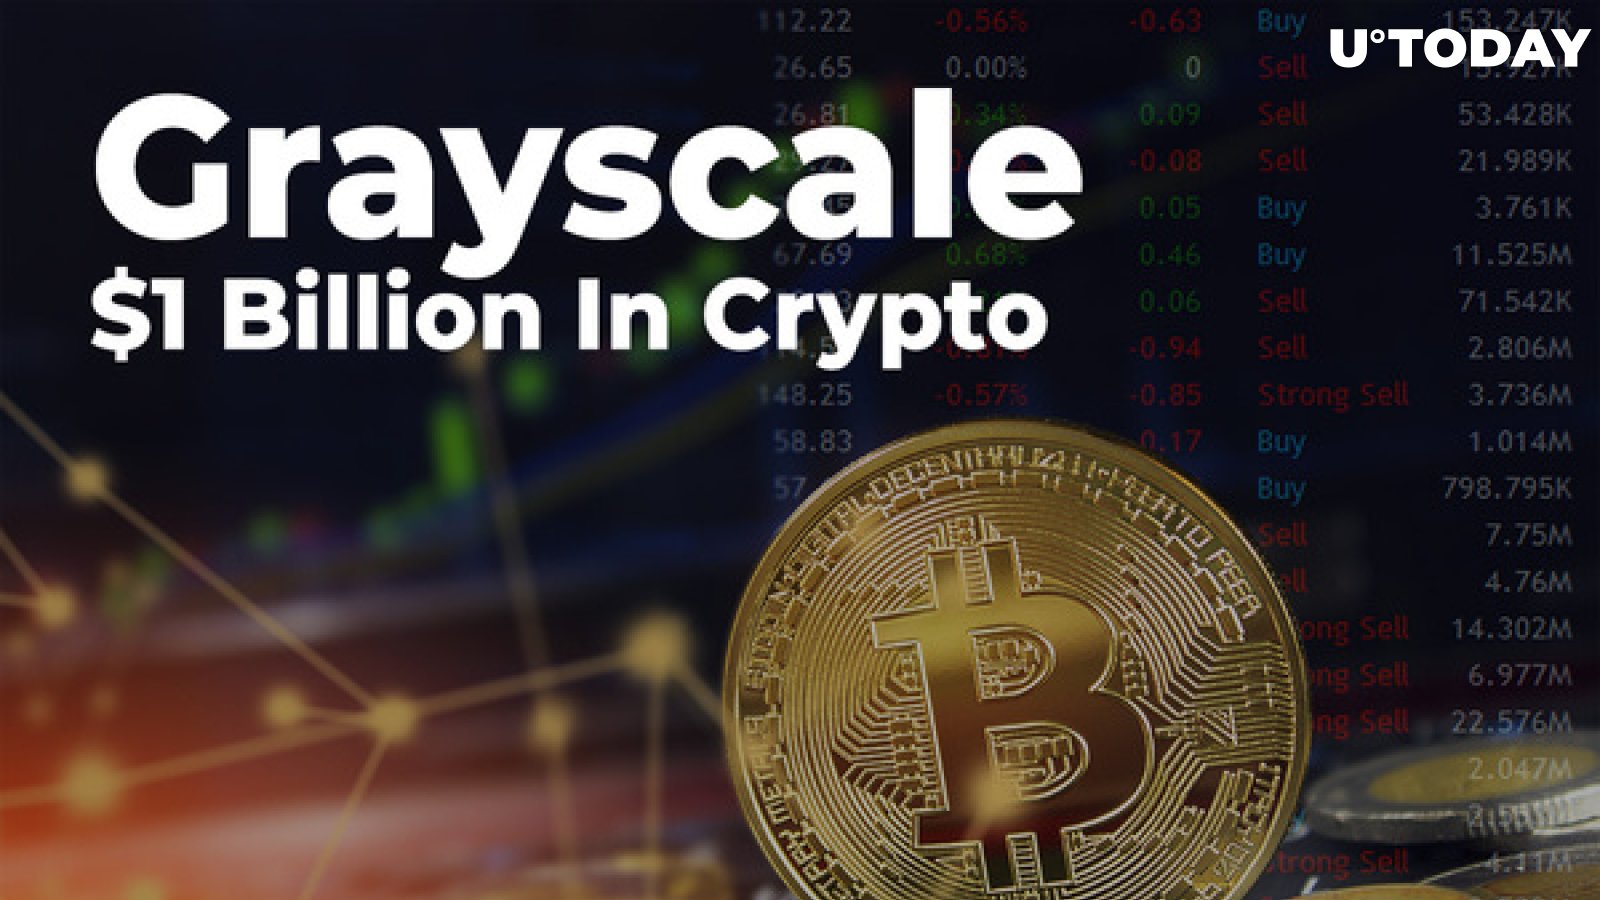 Grayscale Adds $1 Billion In Crypto in 24 Hours, While LTC and BCH Premiums Skyrocket